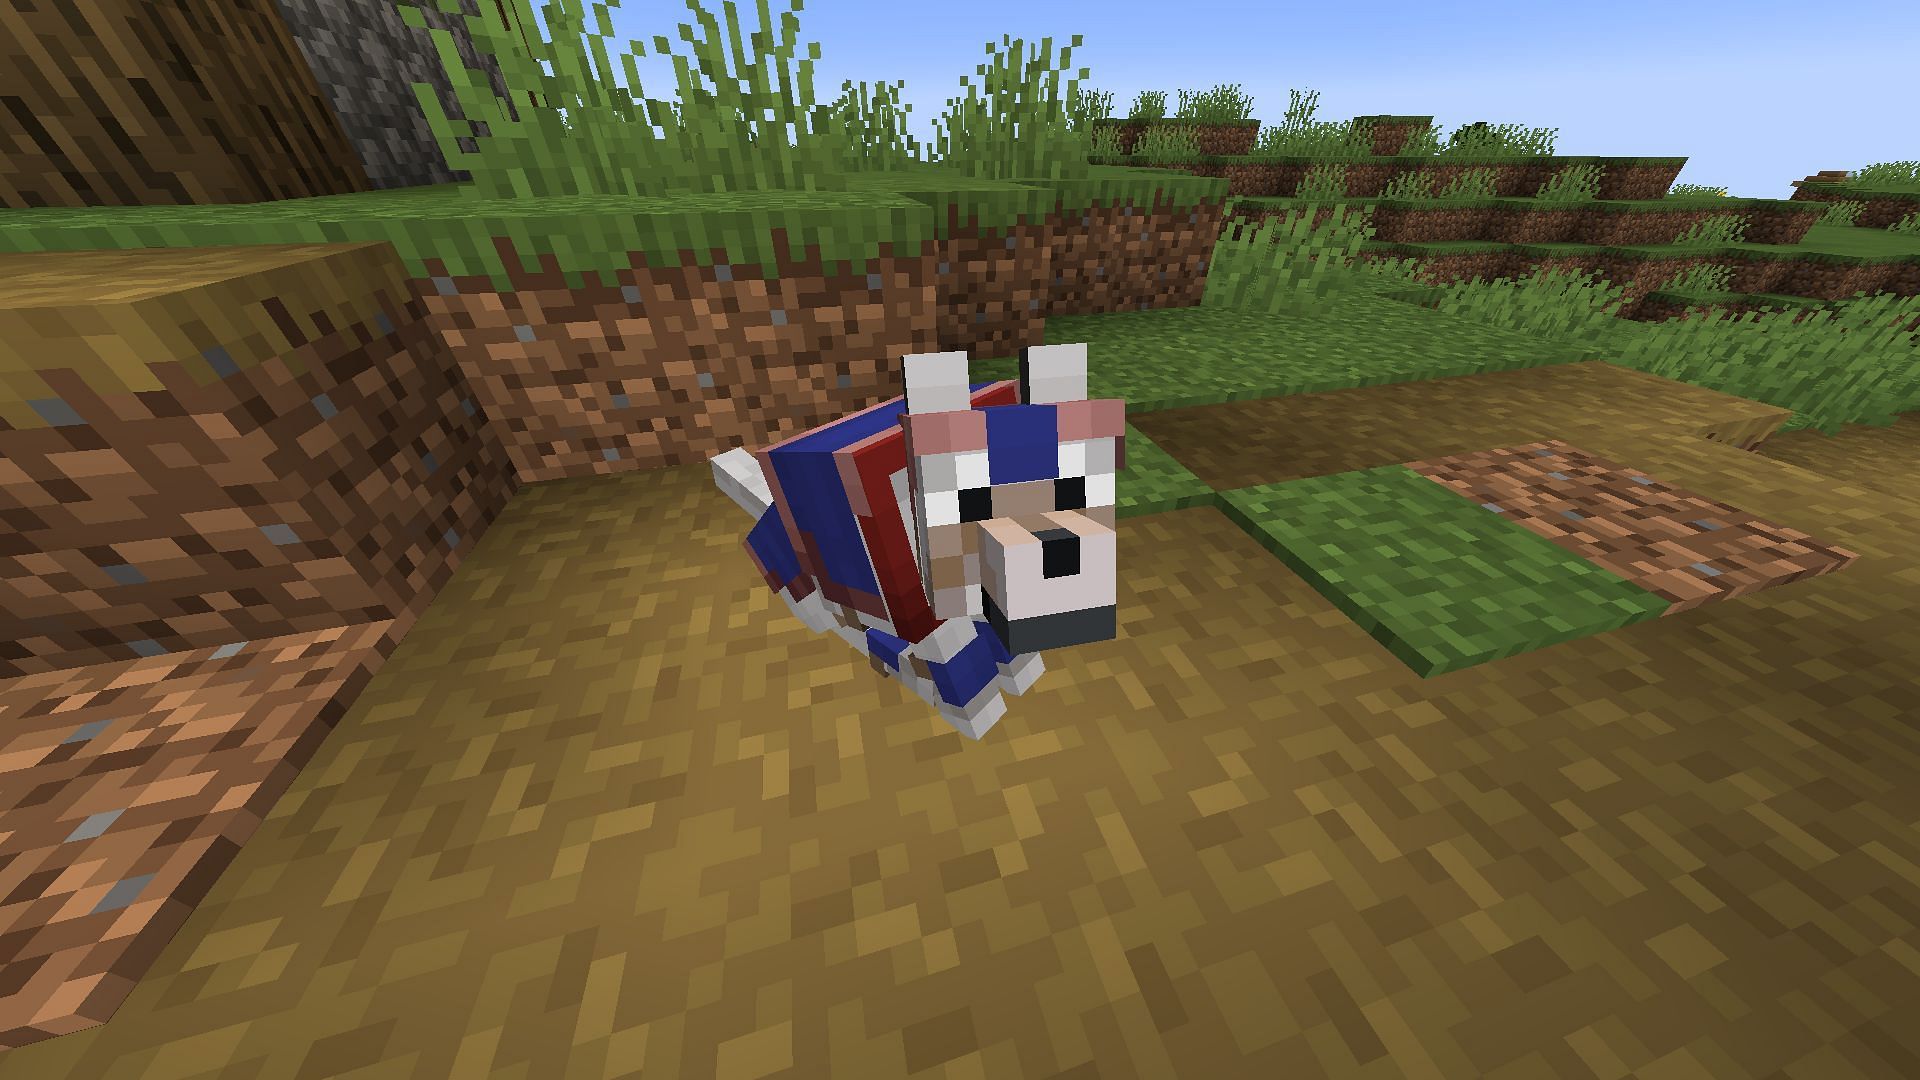 Wolf armor can now be dyed and show signs of wear in Minecraft Snapshot 24w09a (Image via Mojang)